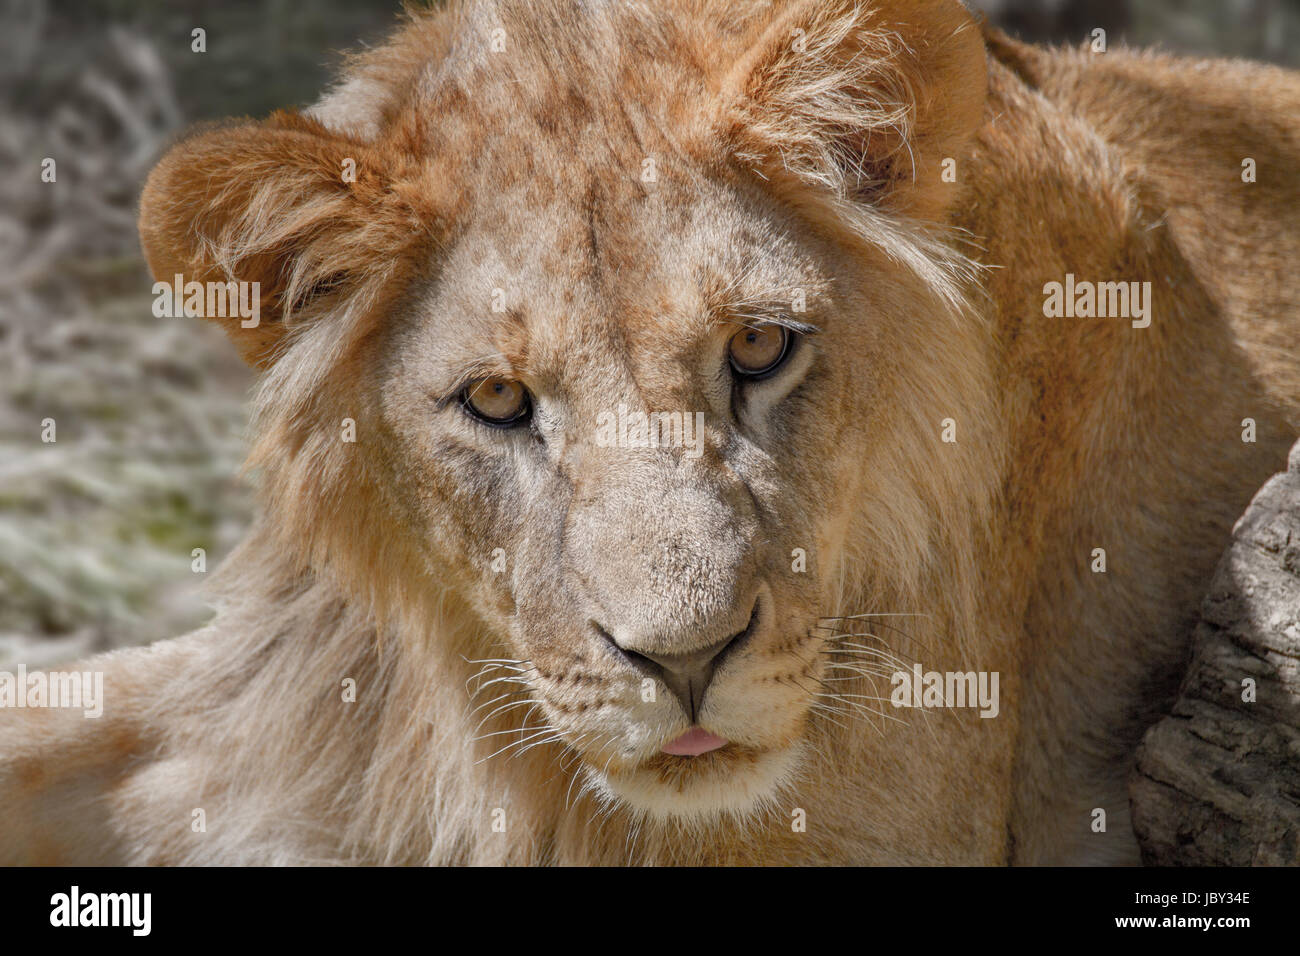 Image of an animal young lion lying on the grass Stock Photo